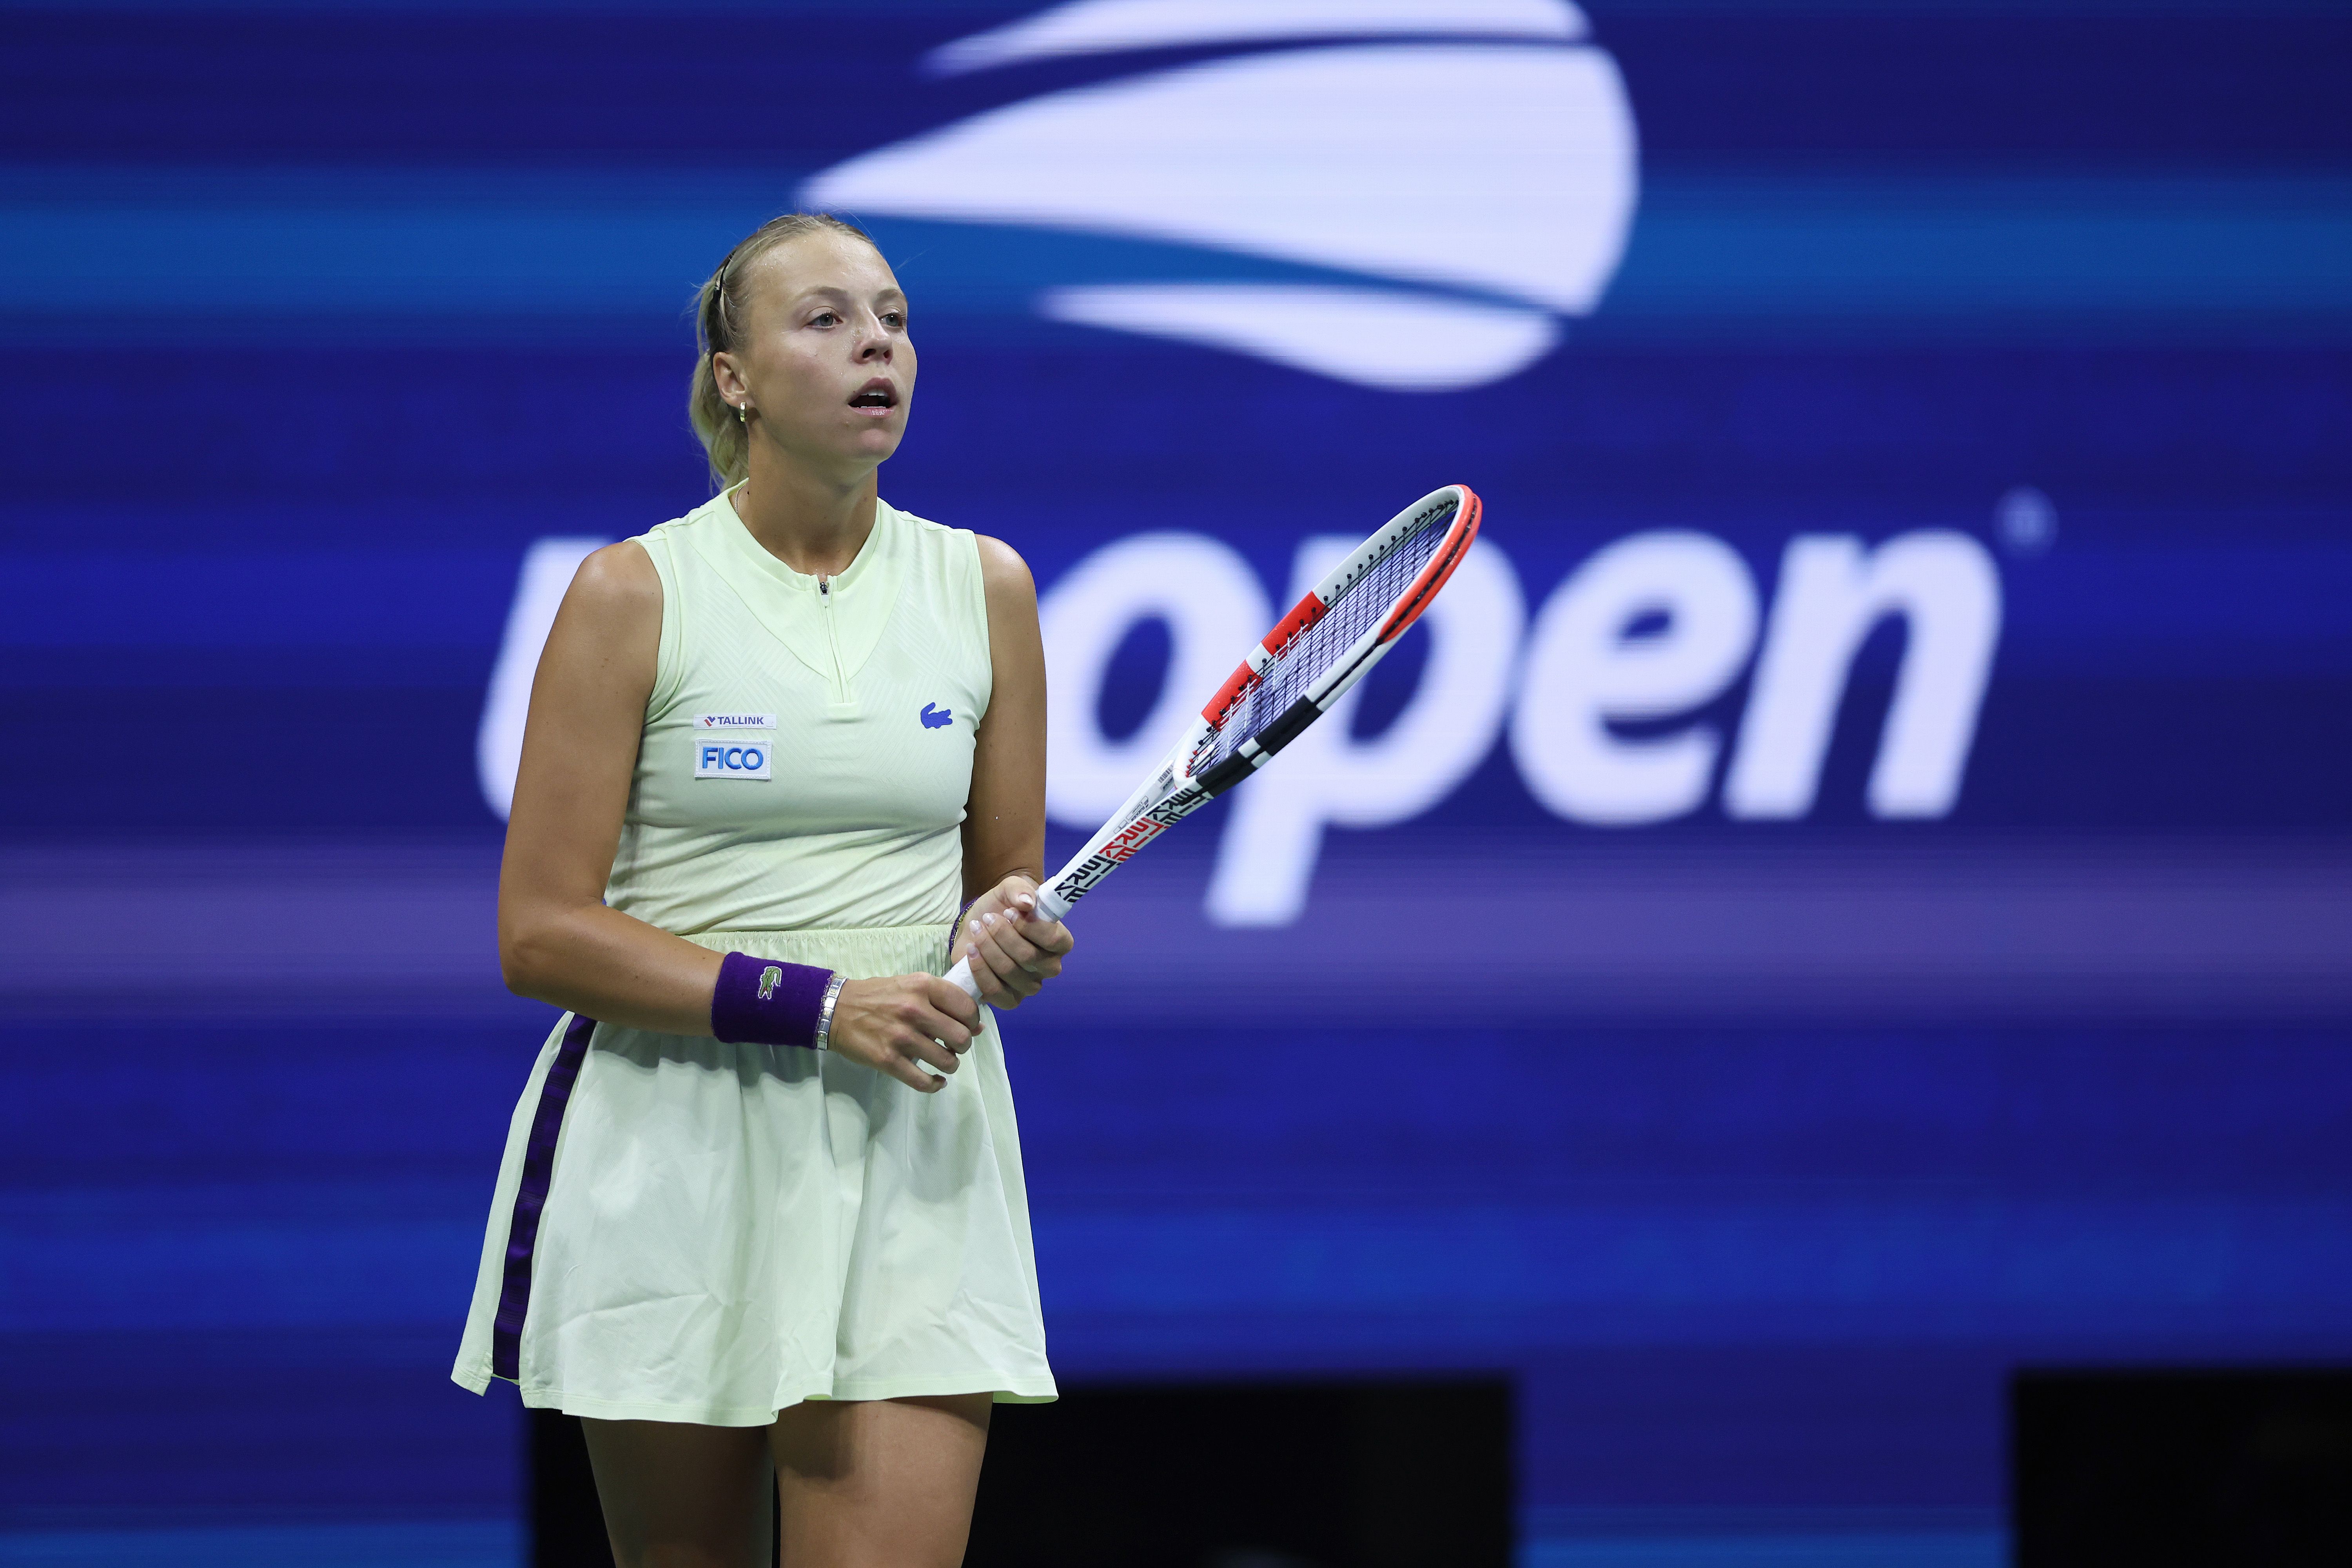 Tennis star Anett Kontaveit playing at the US Open